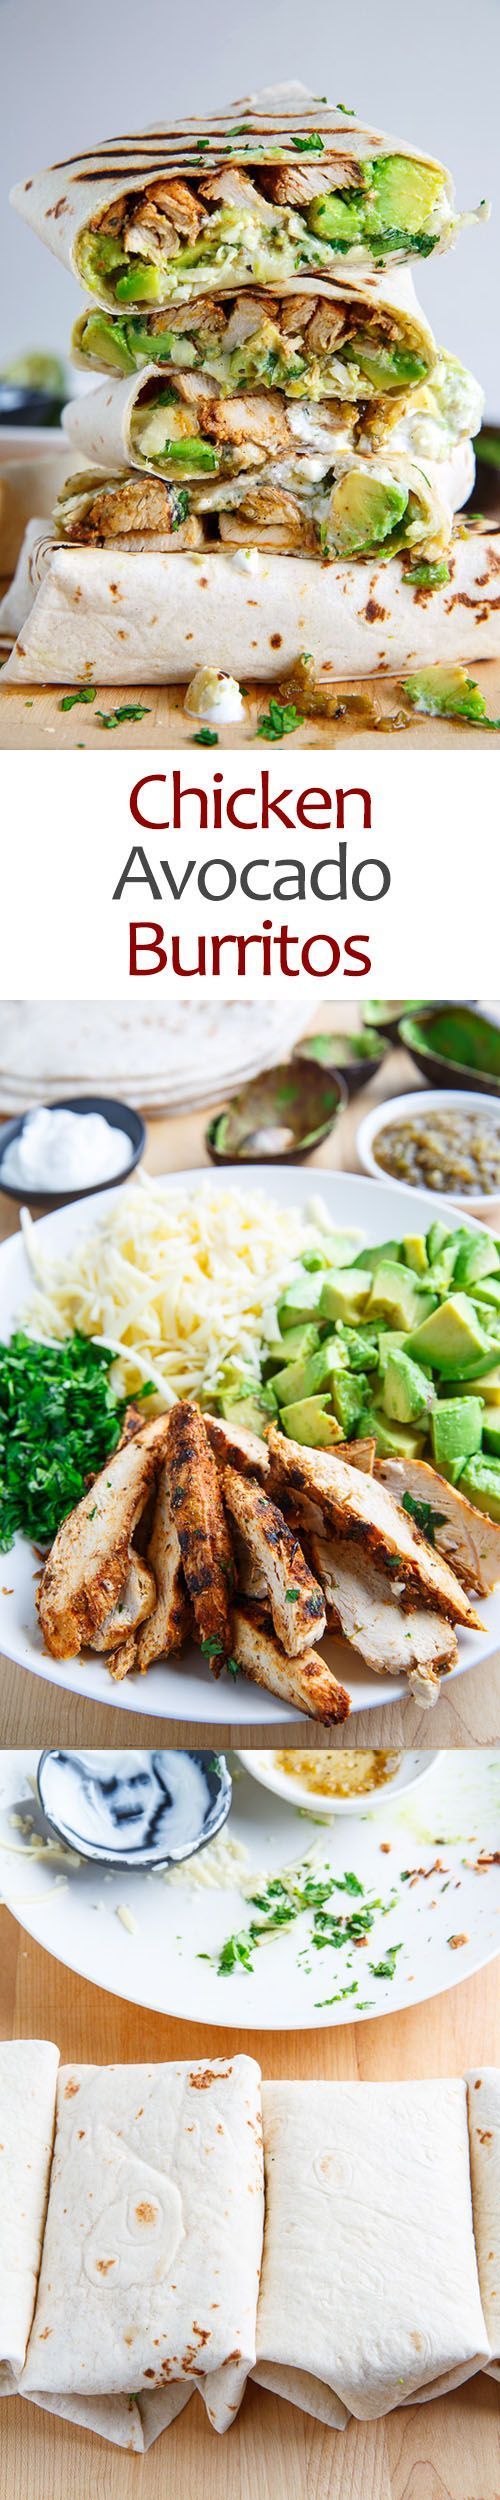 These Chicken and Avocado Burritos are so easy to make and delicious. They are one of my favorite heal